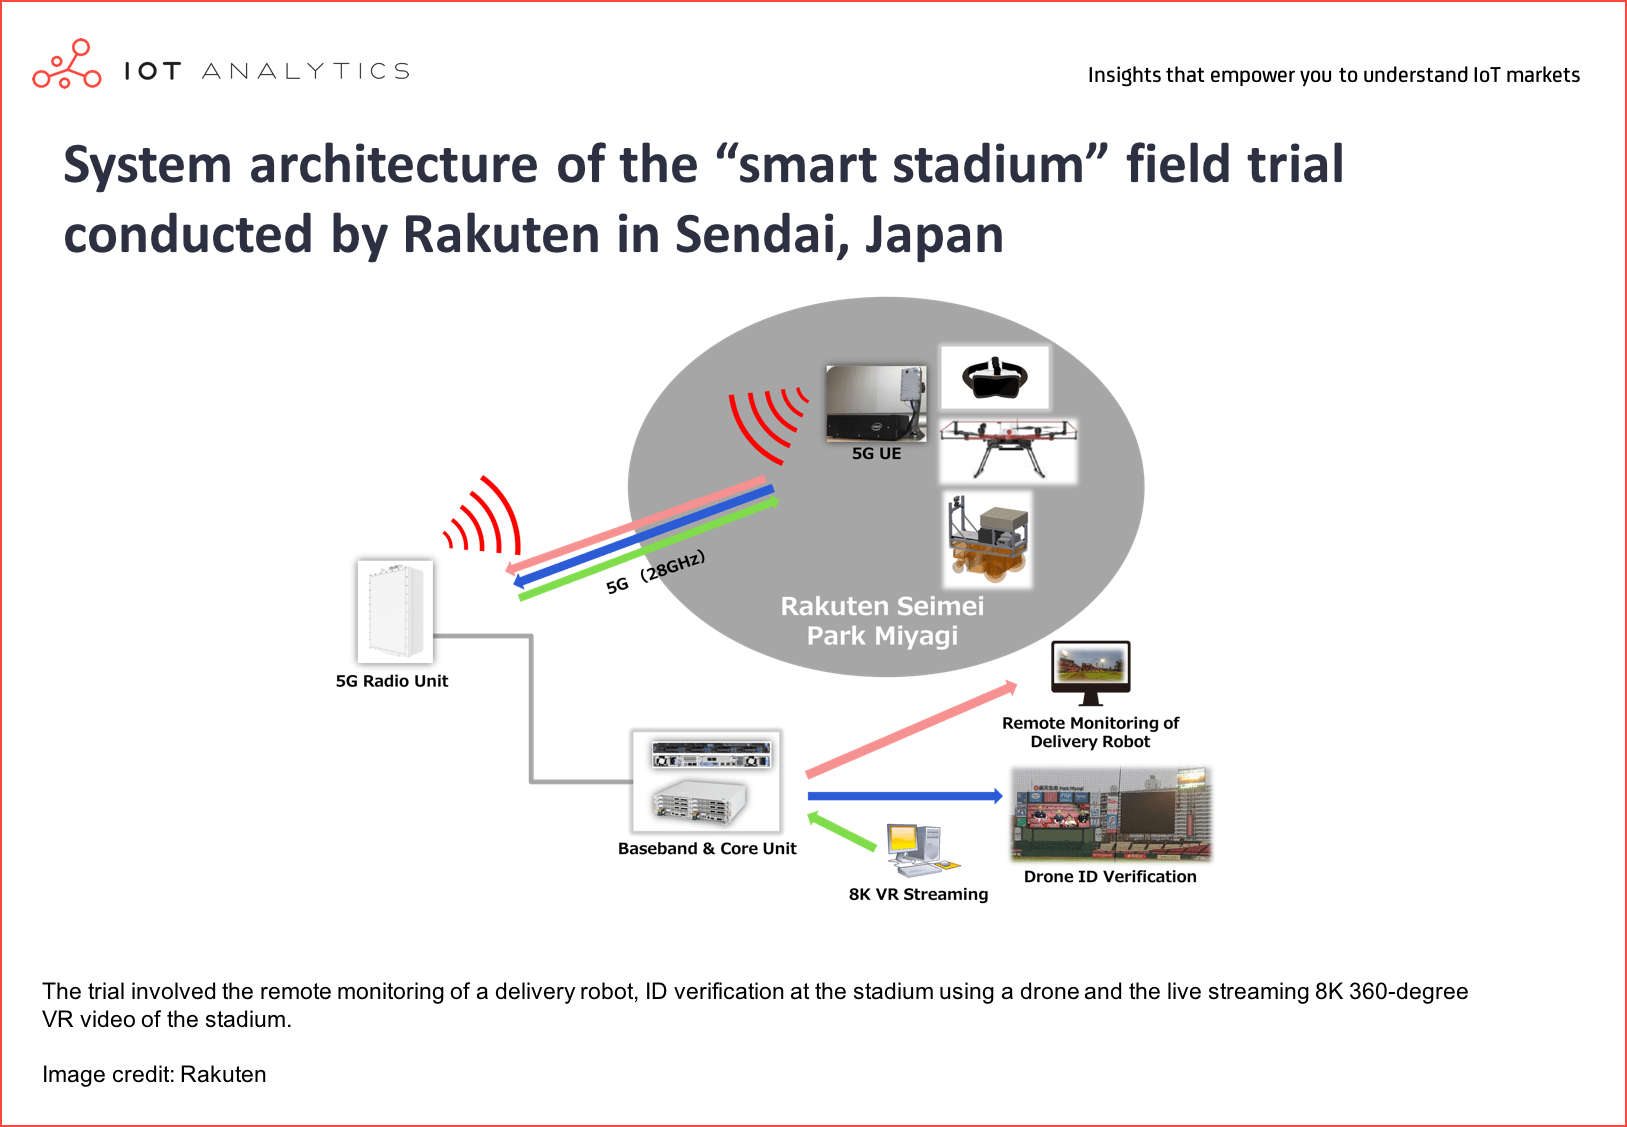 Intelligent Connectivity - System architecture of the “smart stadium” field trial conducted by Rakuten in Sendai, Japan